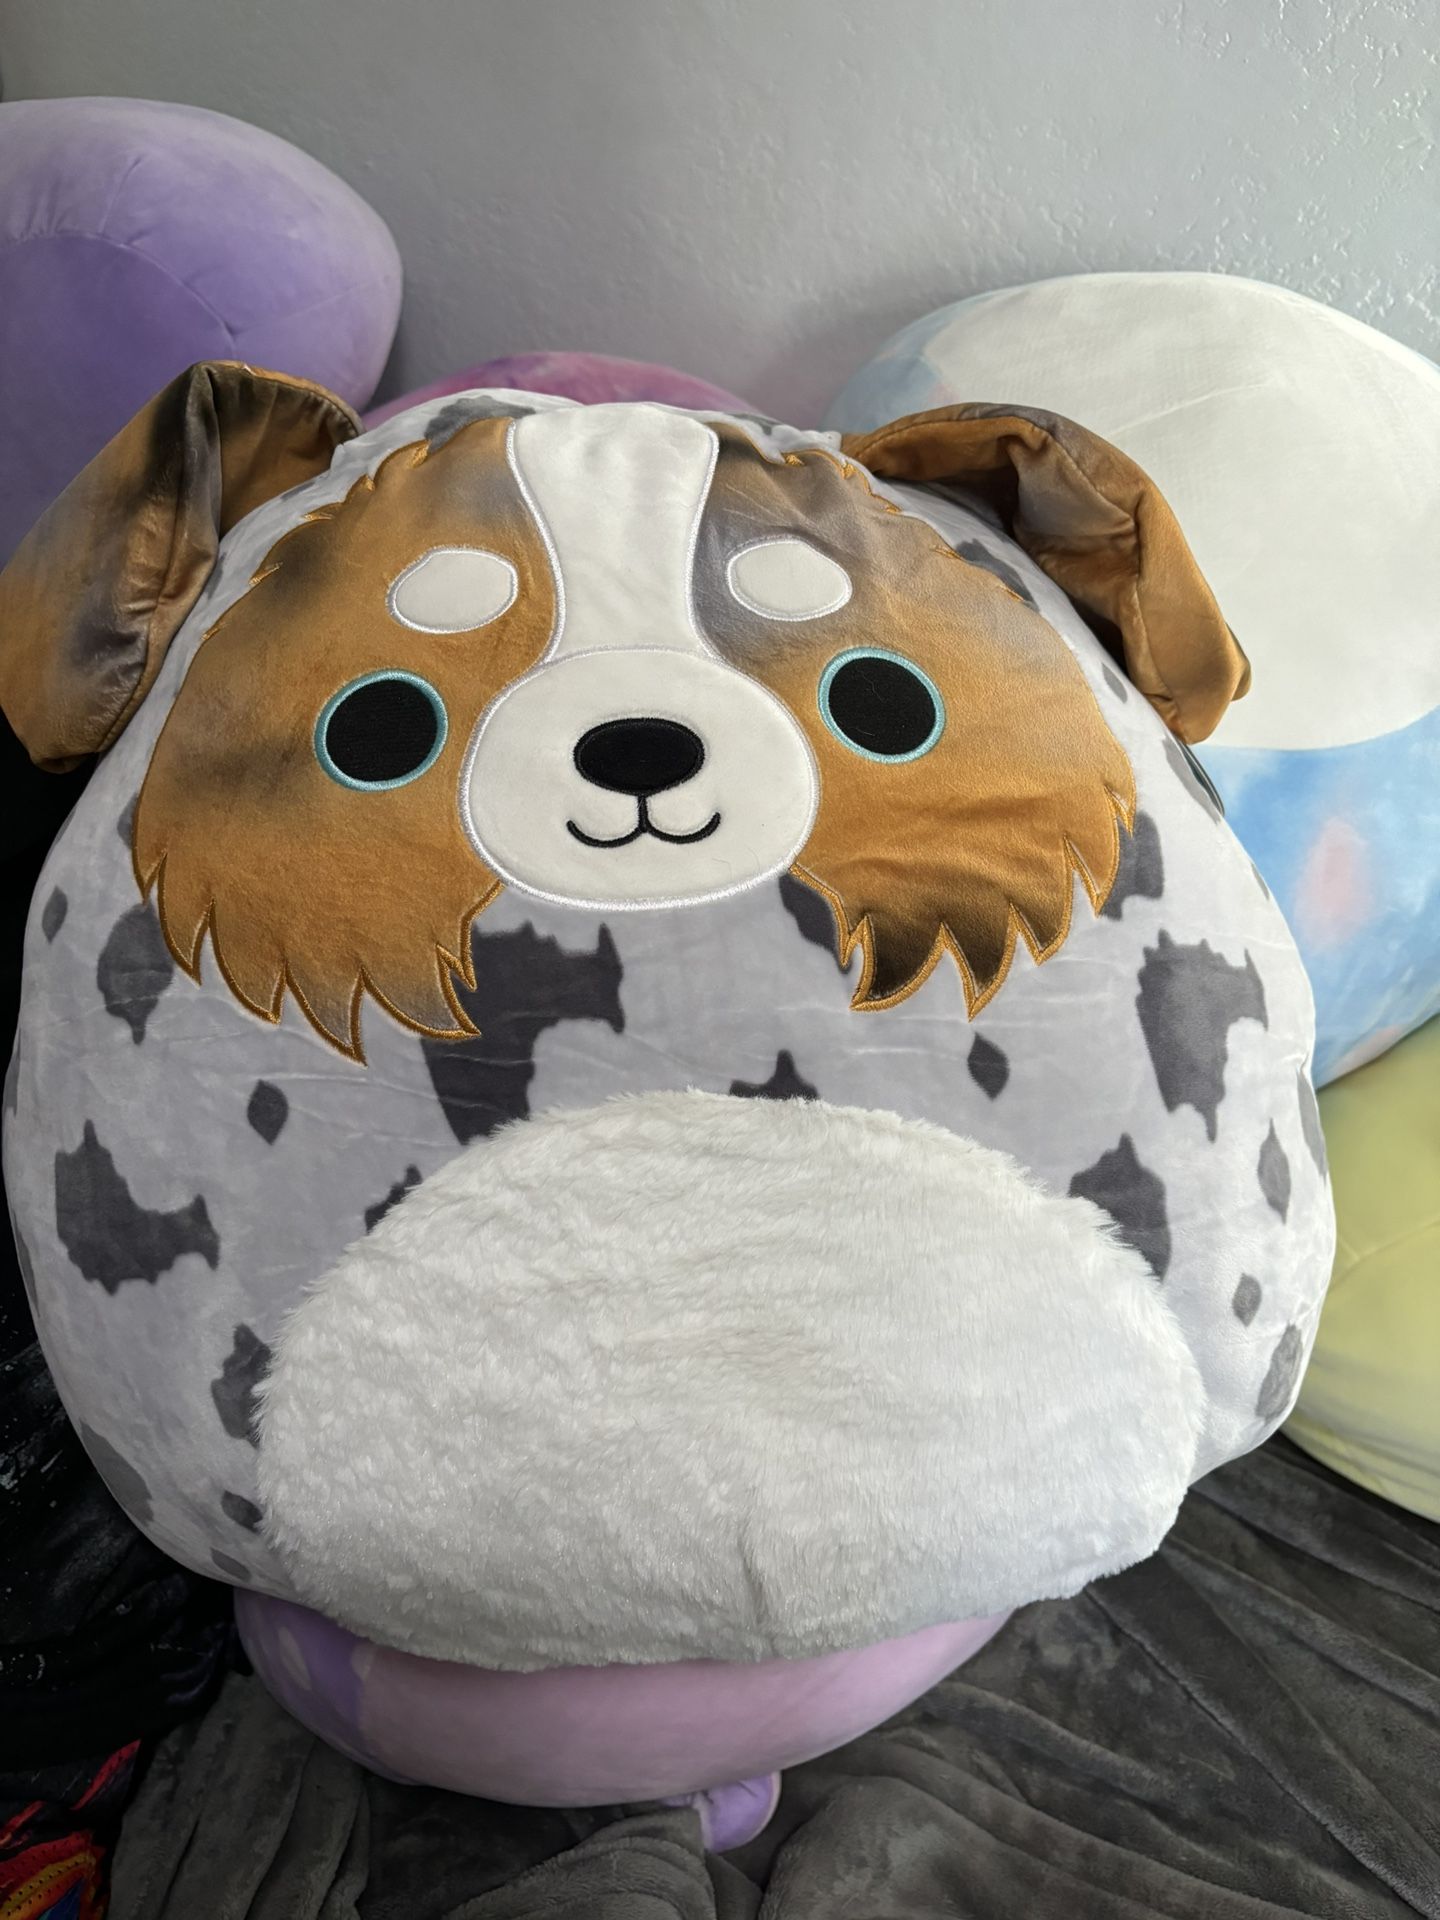 (Rare) Raylor Squishmallow 20” Target Exclusive